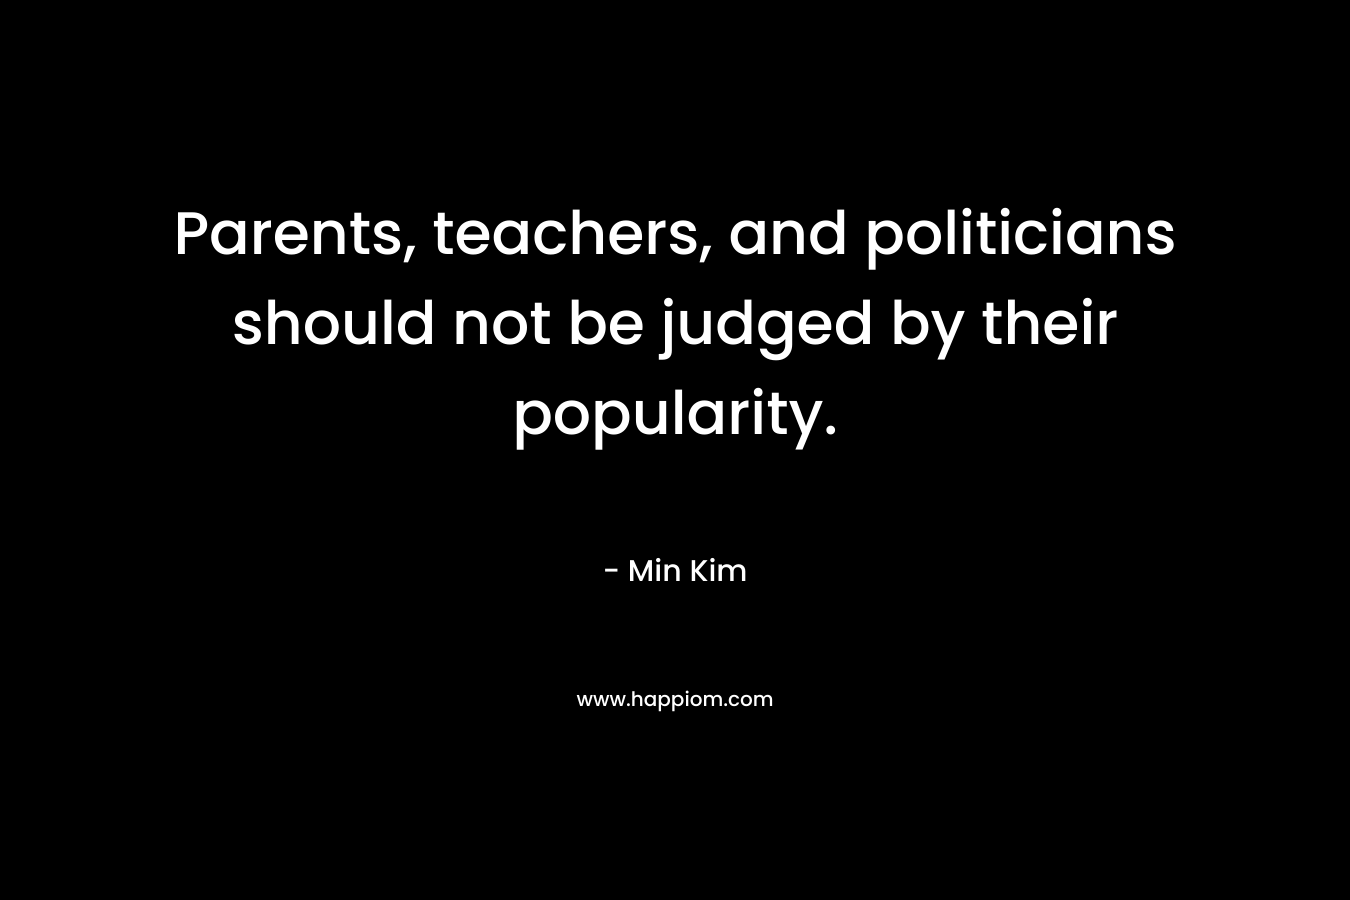 Parents, teachers, and politicians should not be judged by their popularity. – Min Kim